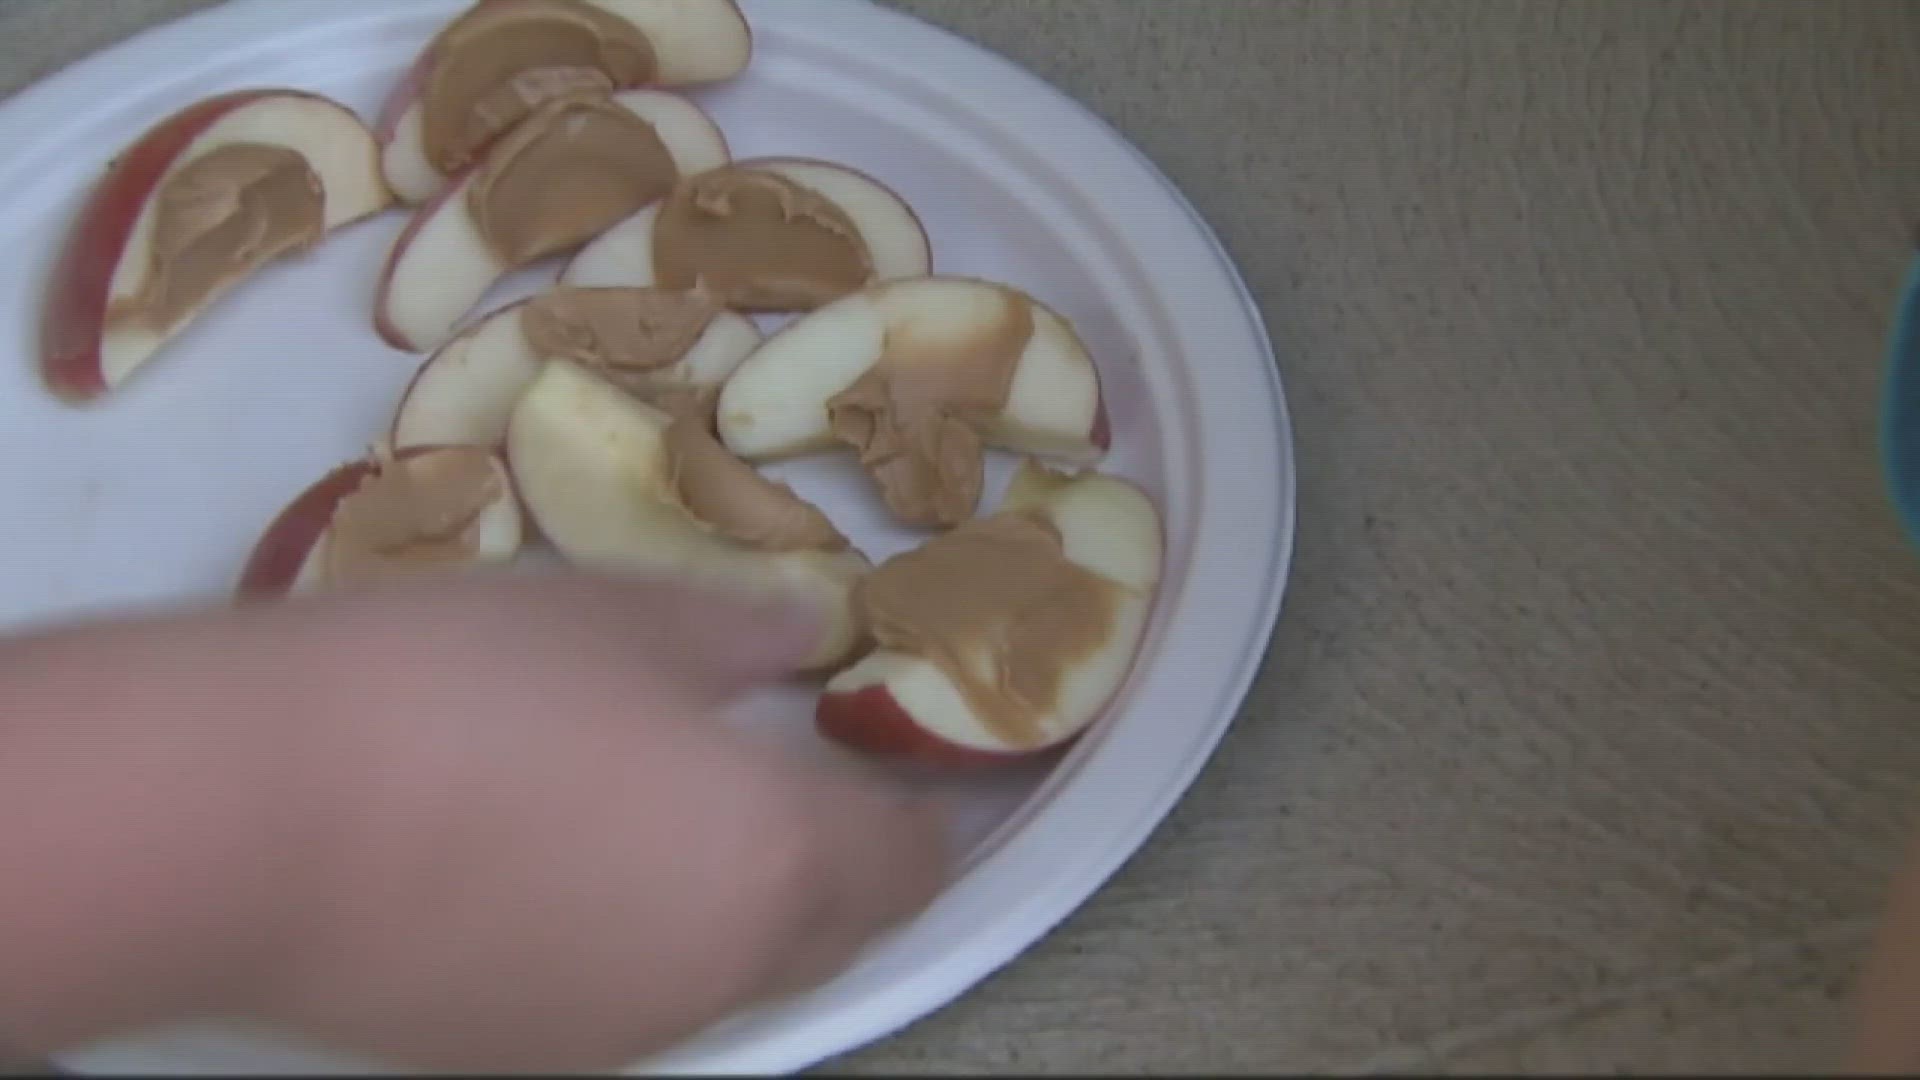 A dietician with East Tennessee Children's Hospital recommends that children try to eat a variety of different foods.